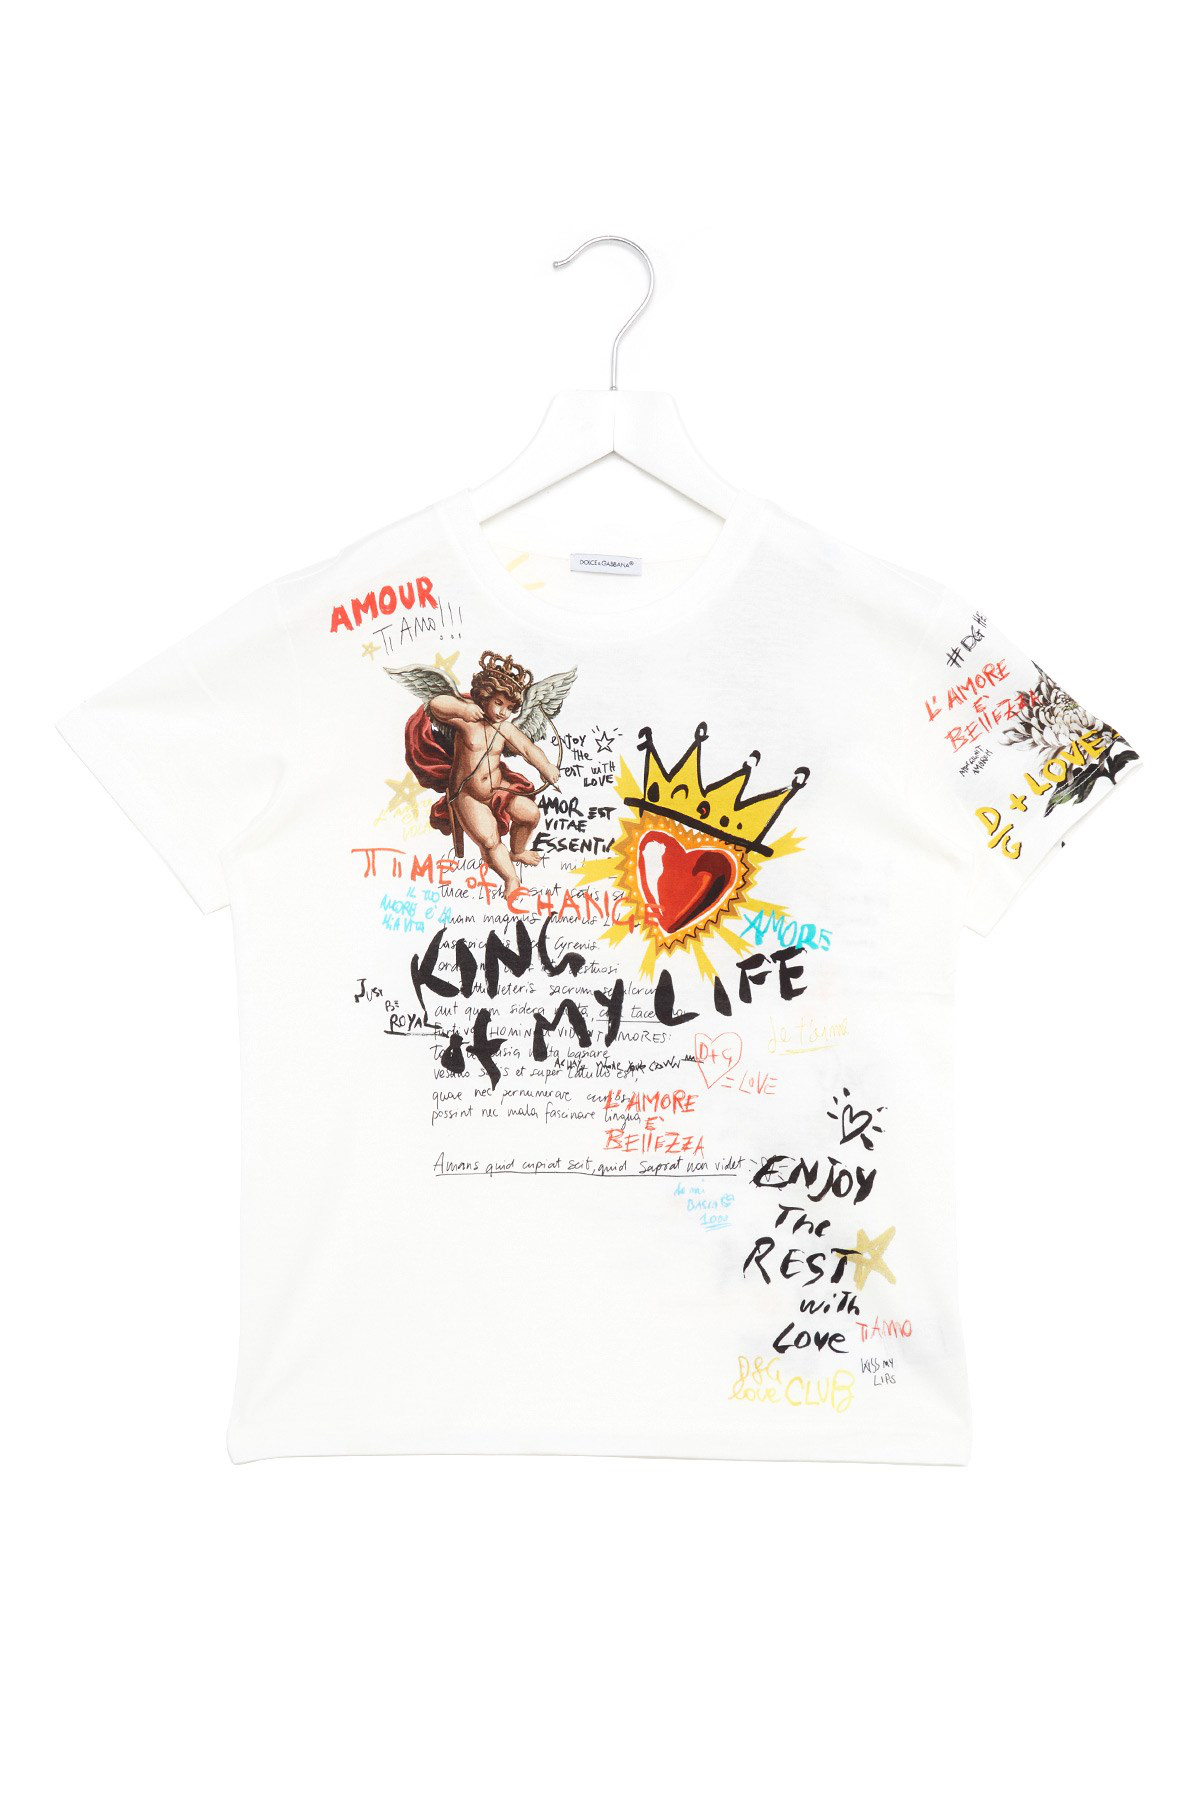 dolce and gabbana king of my life t shirt